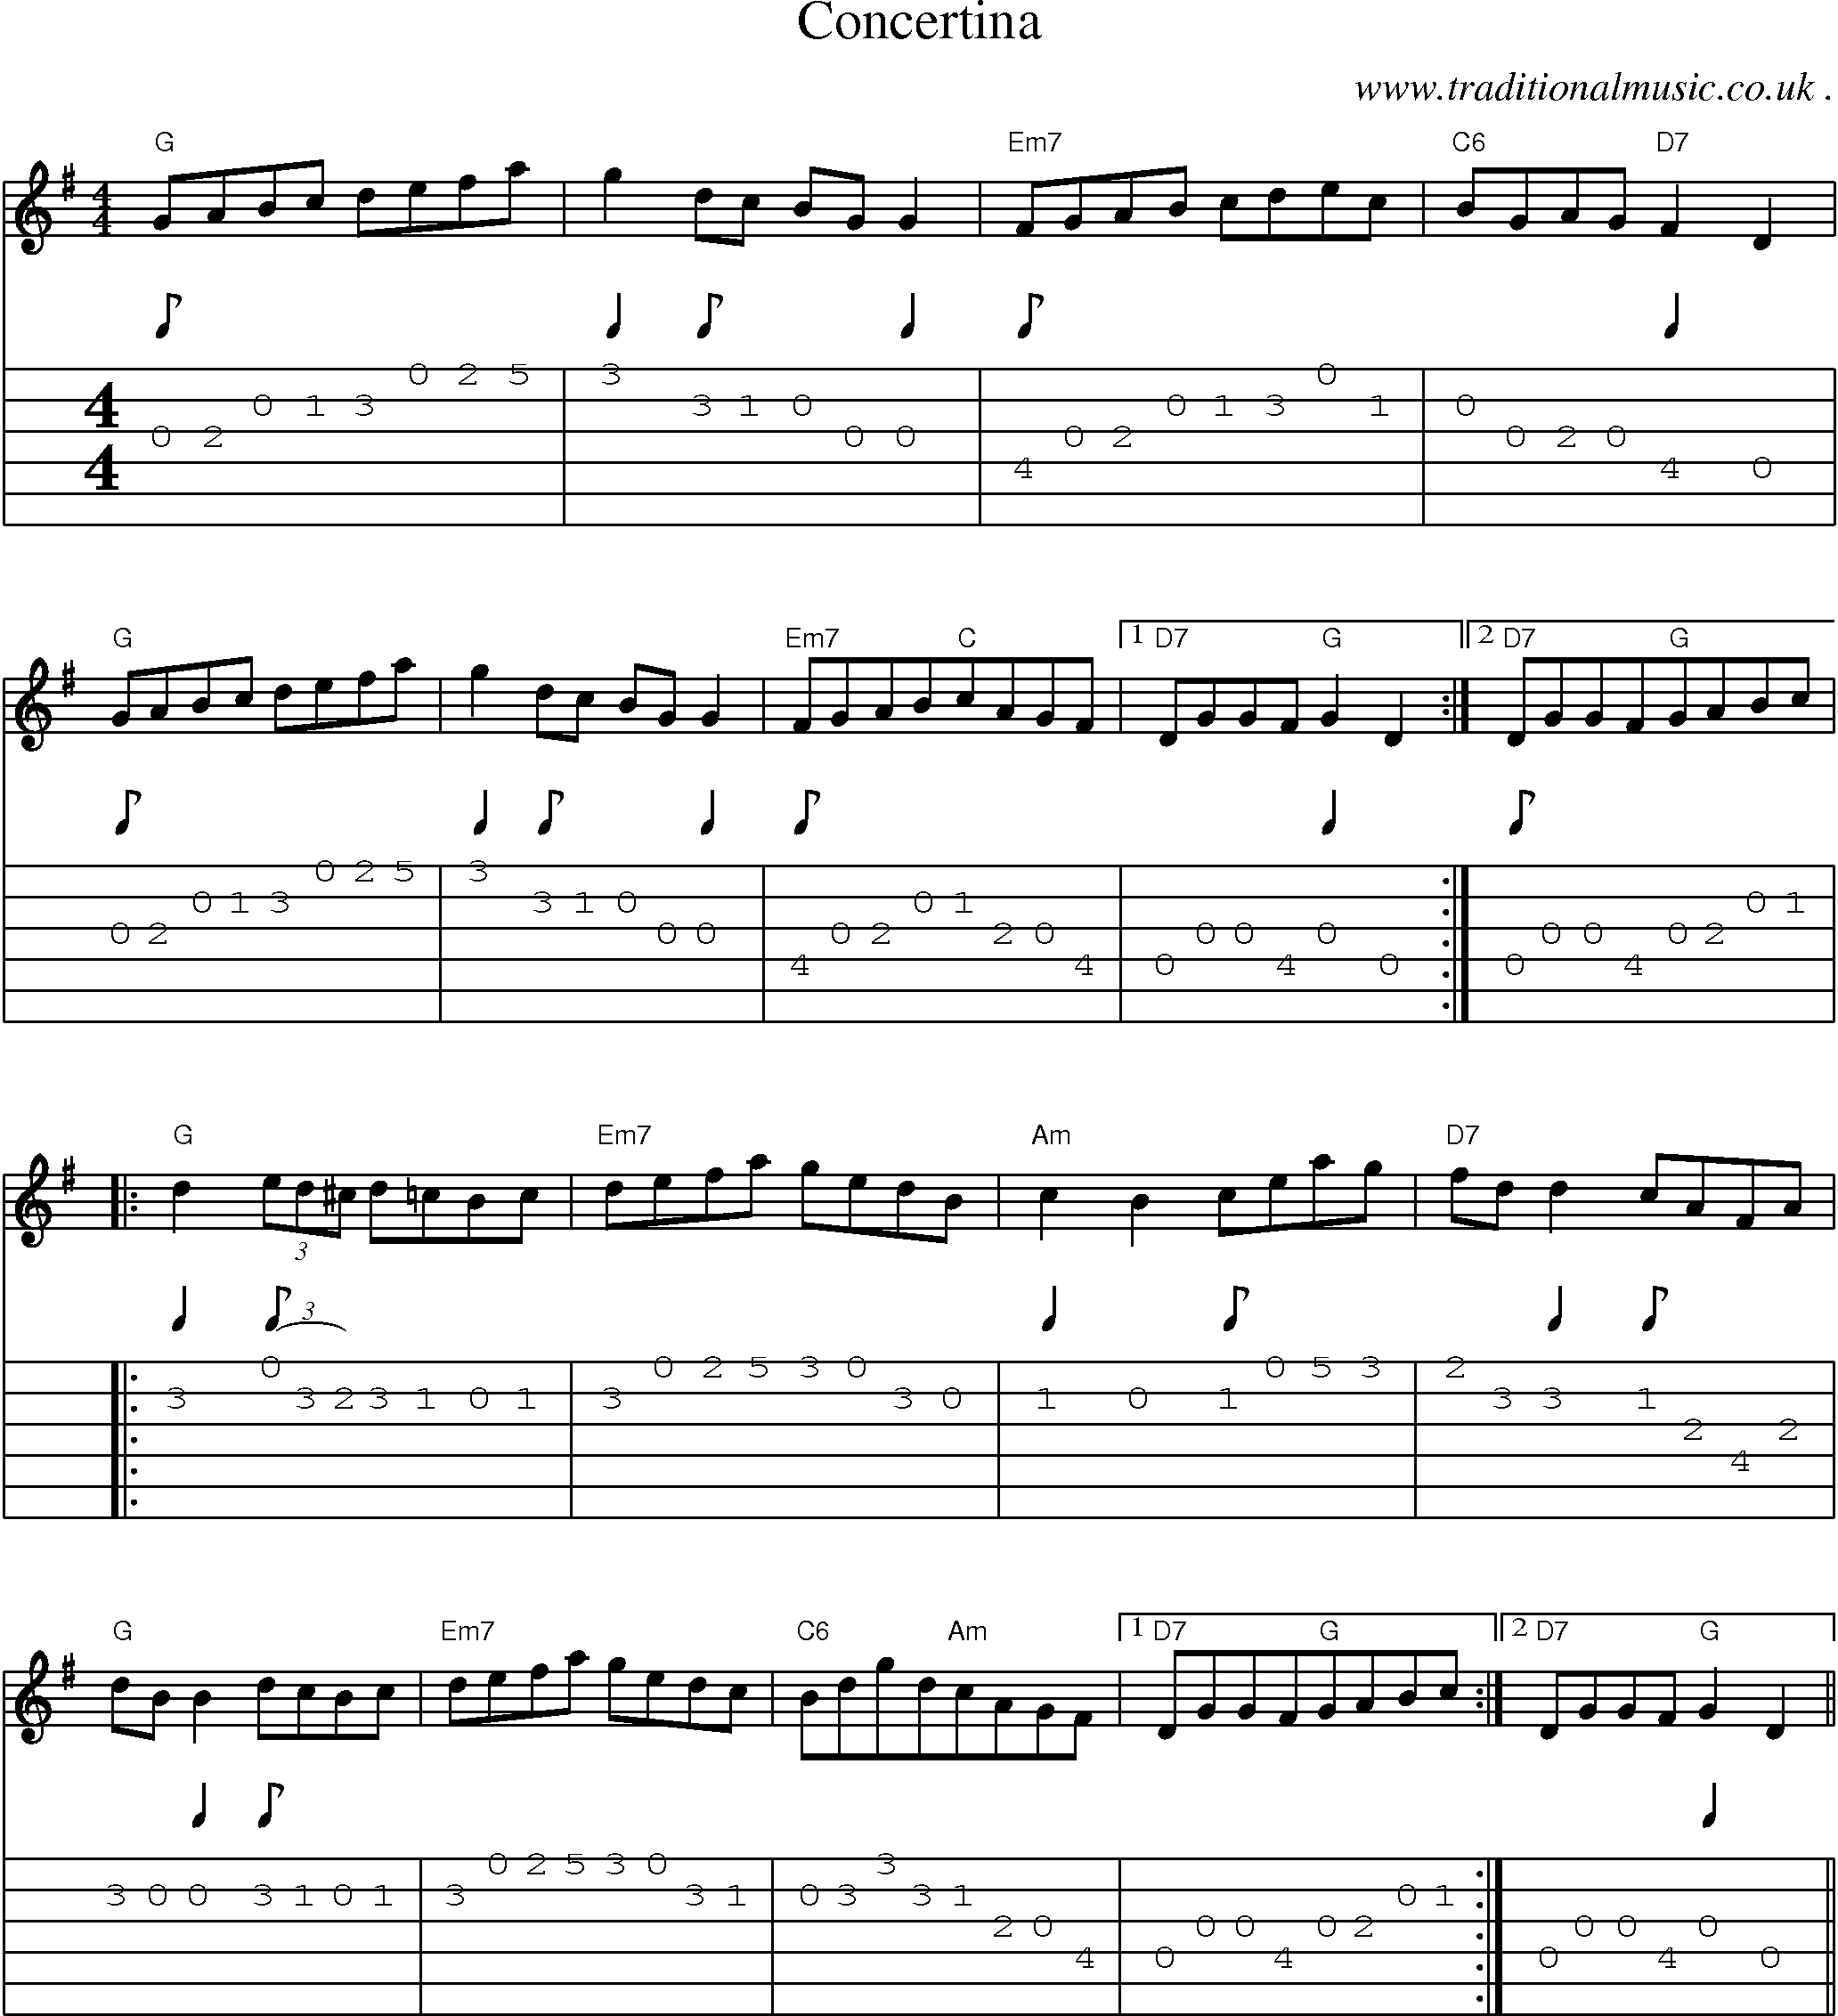 Sheet-Music and Guitar Tabs for Concertina